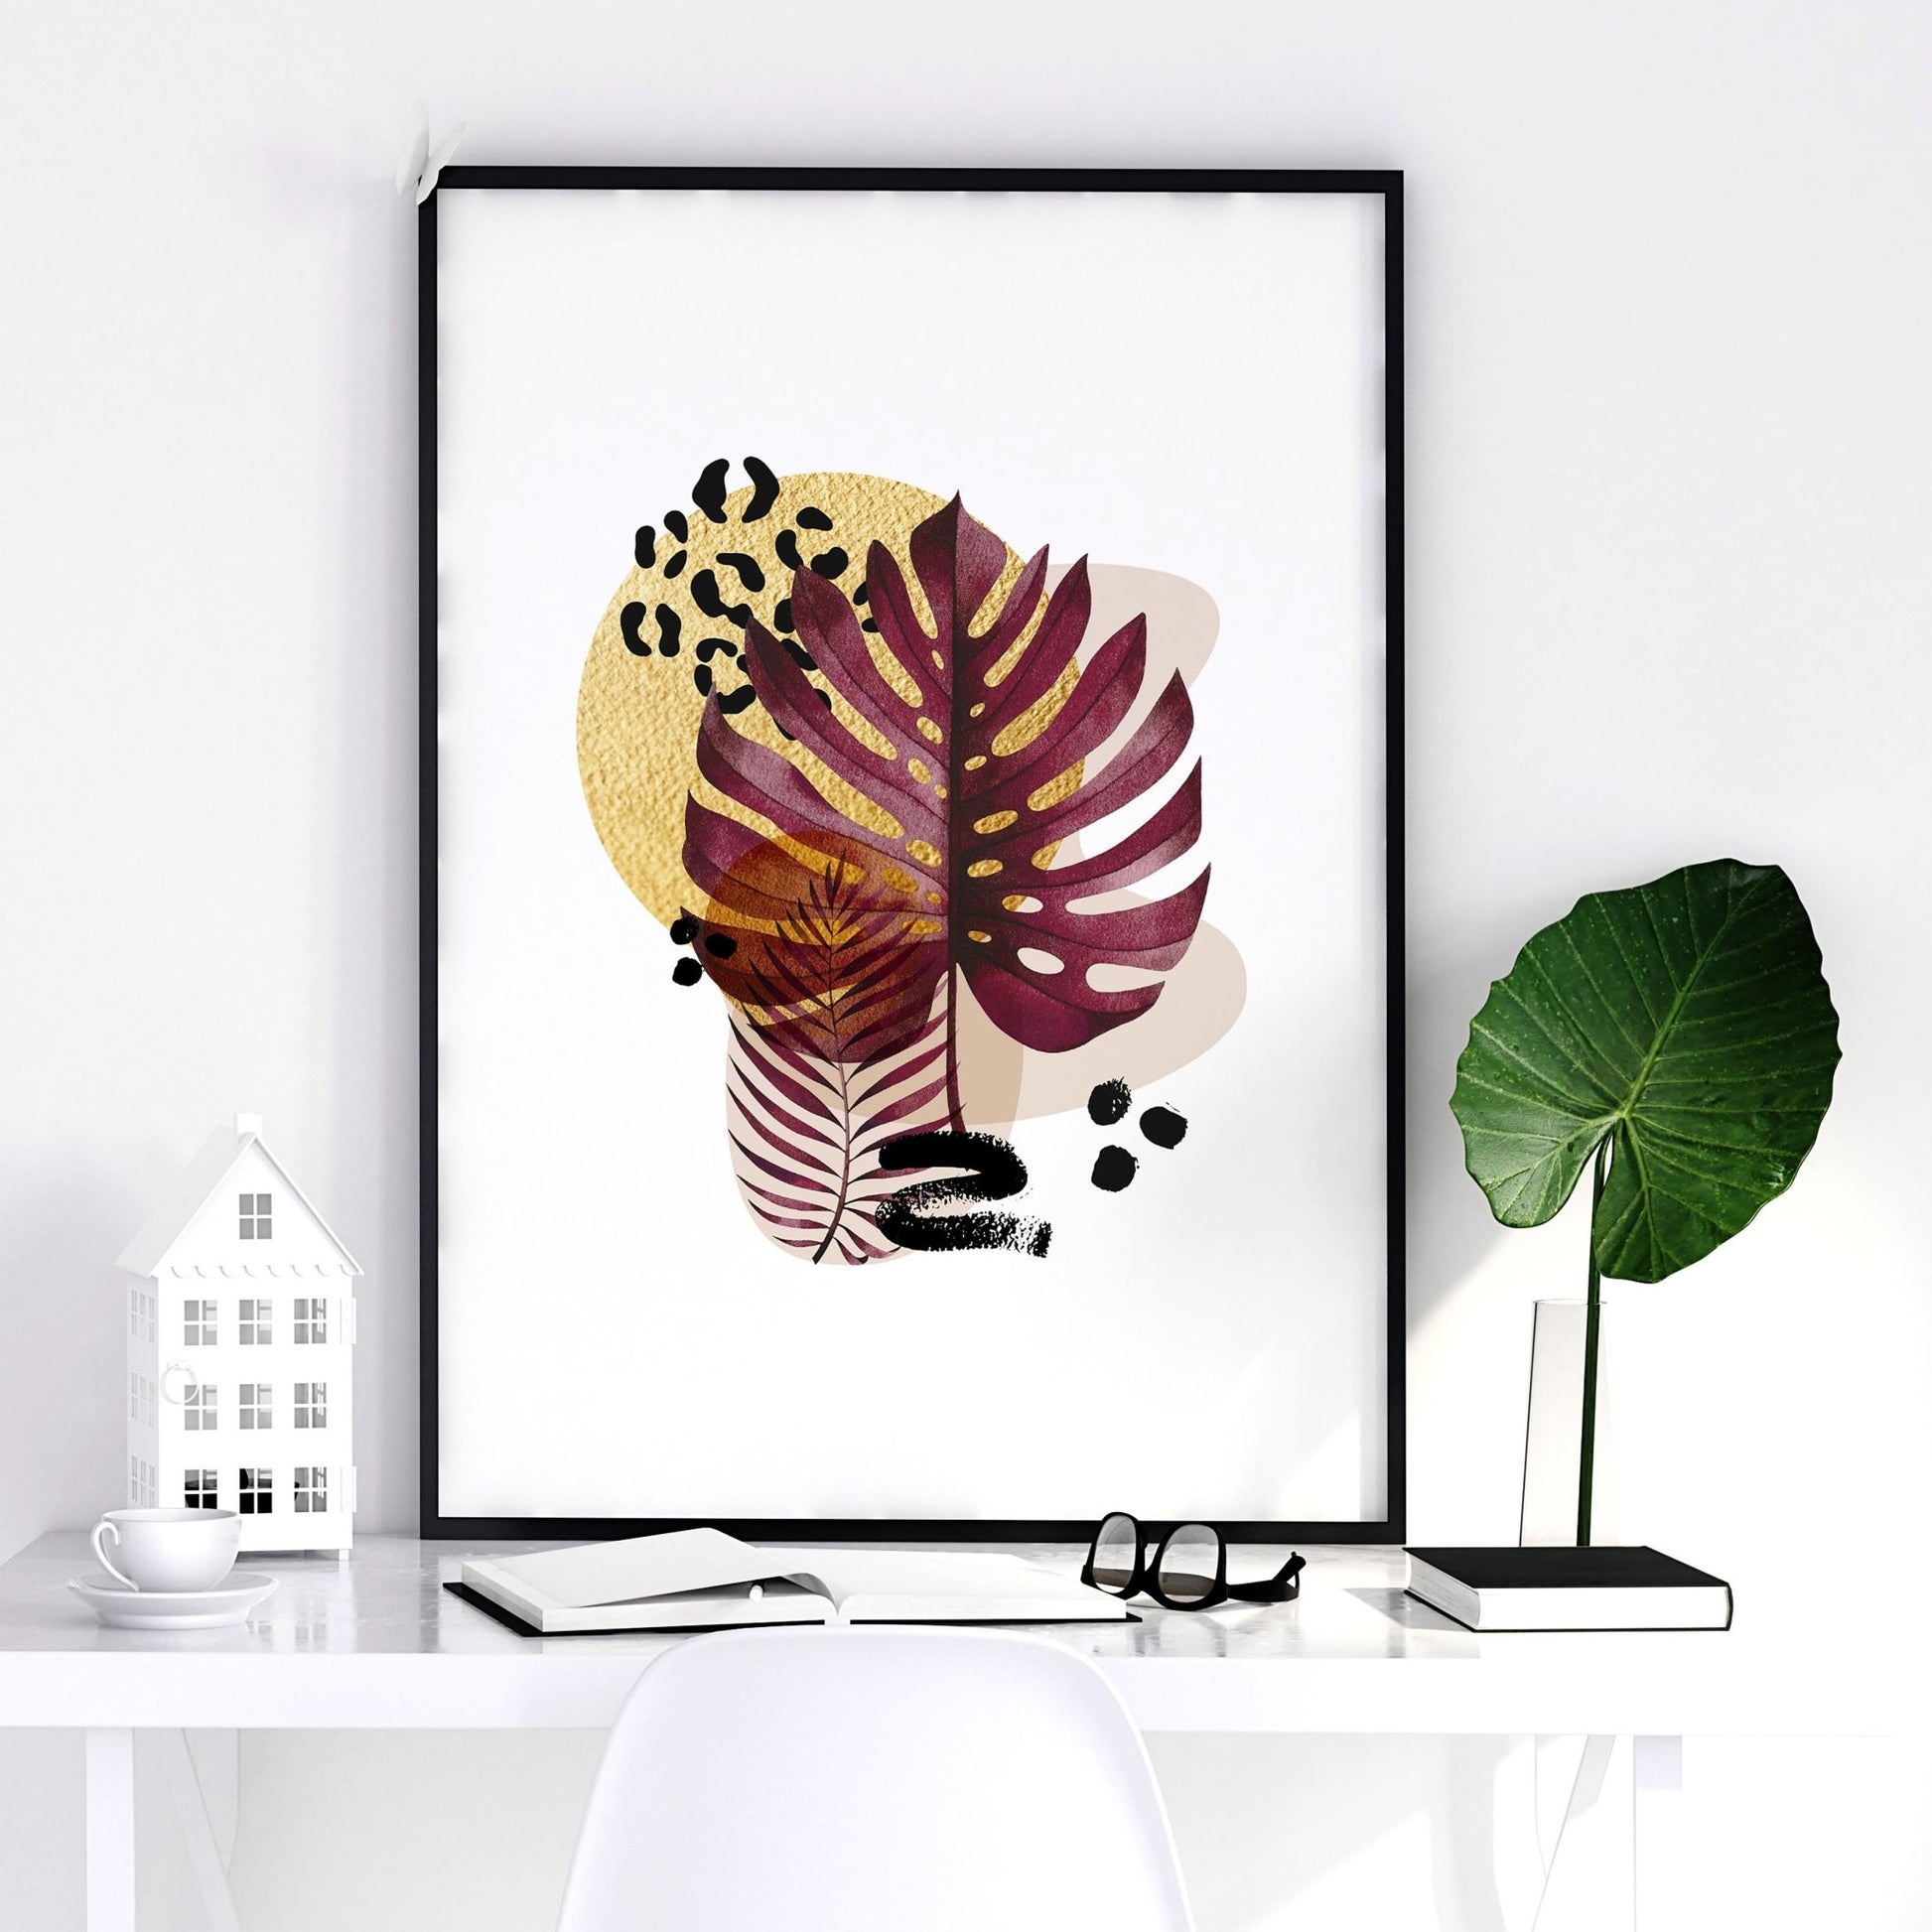 Home office decor ideas for her | set of 3 wall art prints - About Wall Art